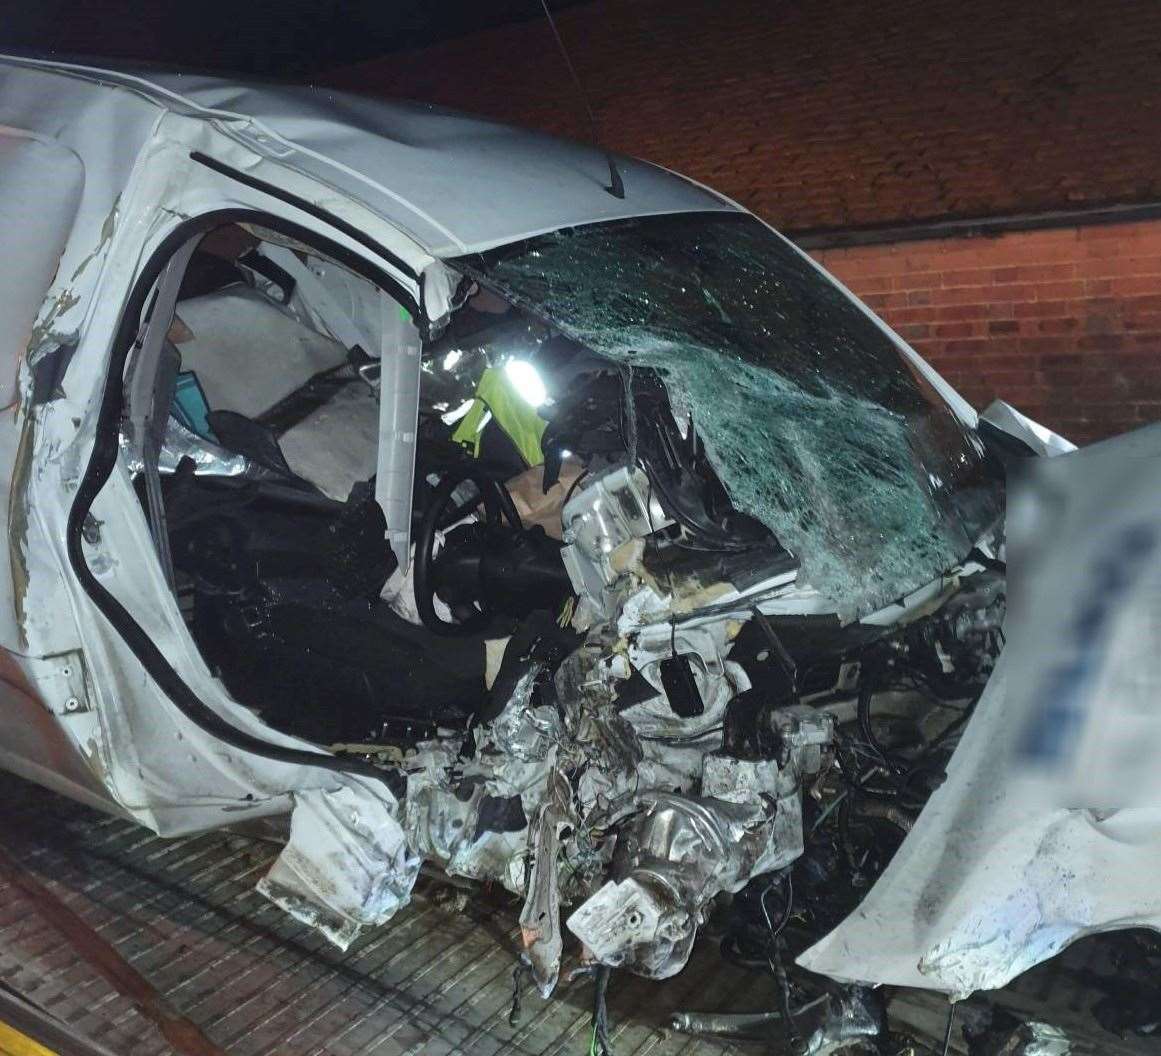 Josh Keen from Maidstone caused a serious head-on collision while driving his white Peugeot van. Picture: Sussex Police